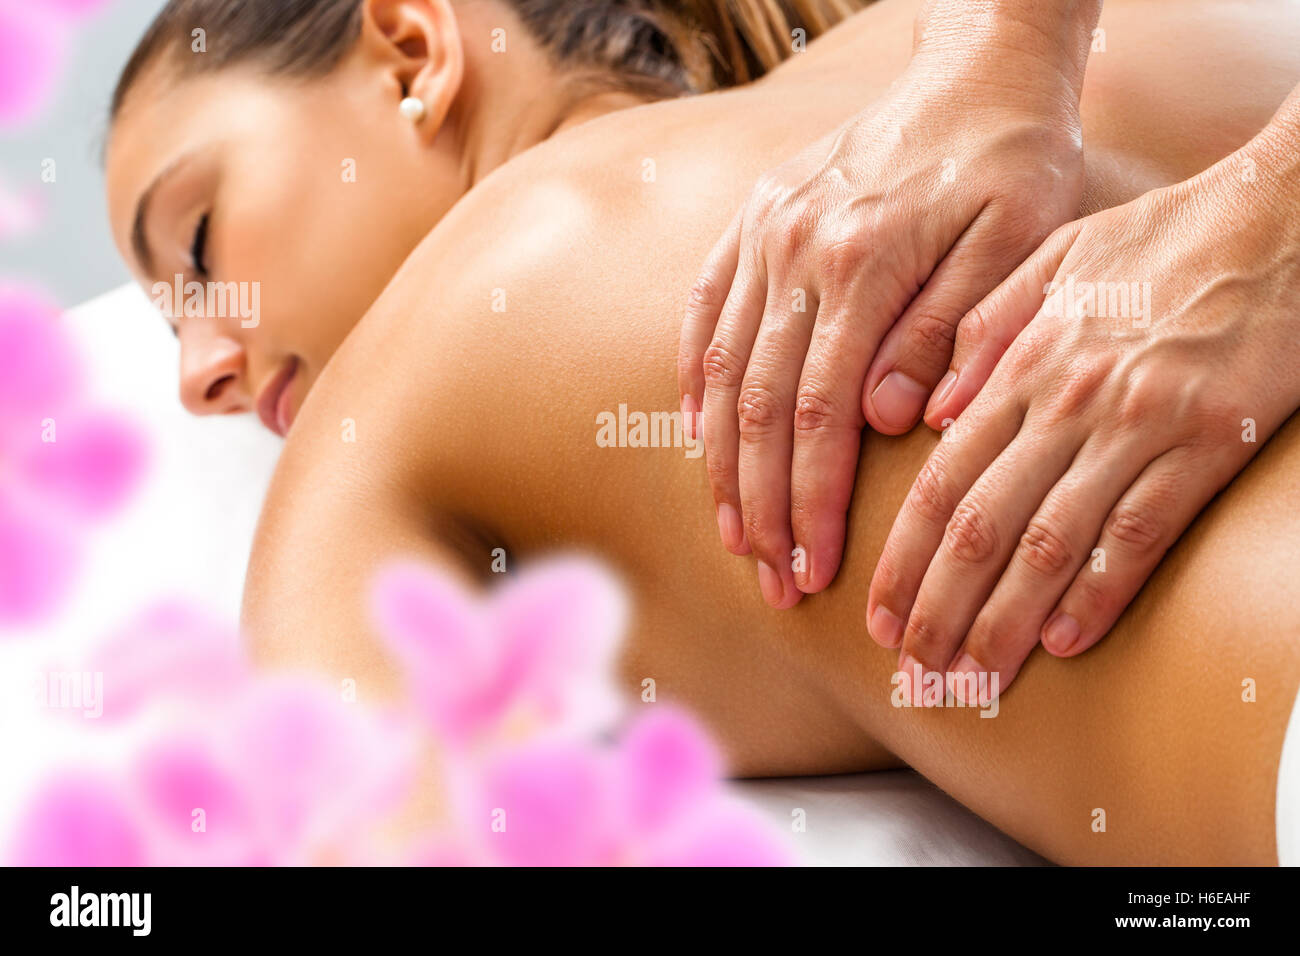 Close up of Hands doing Relaxing back massage on woman in spa. Stock Photo